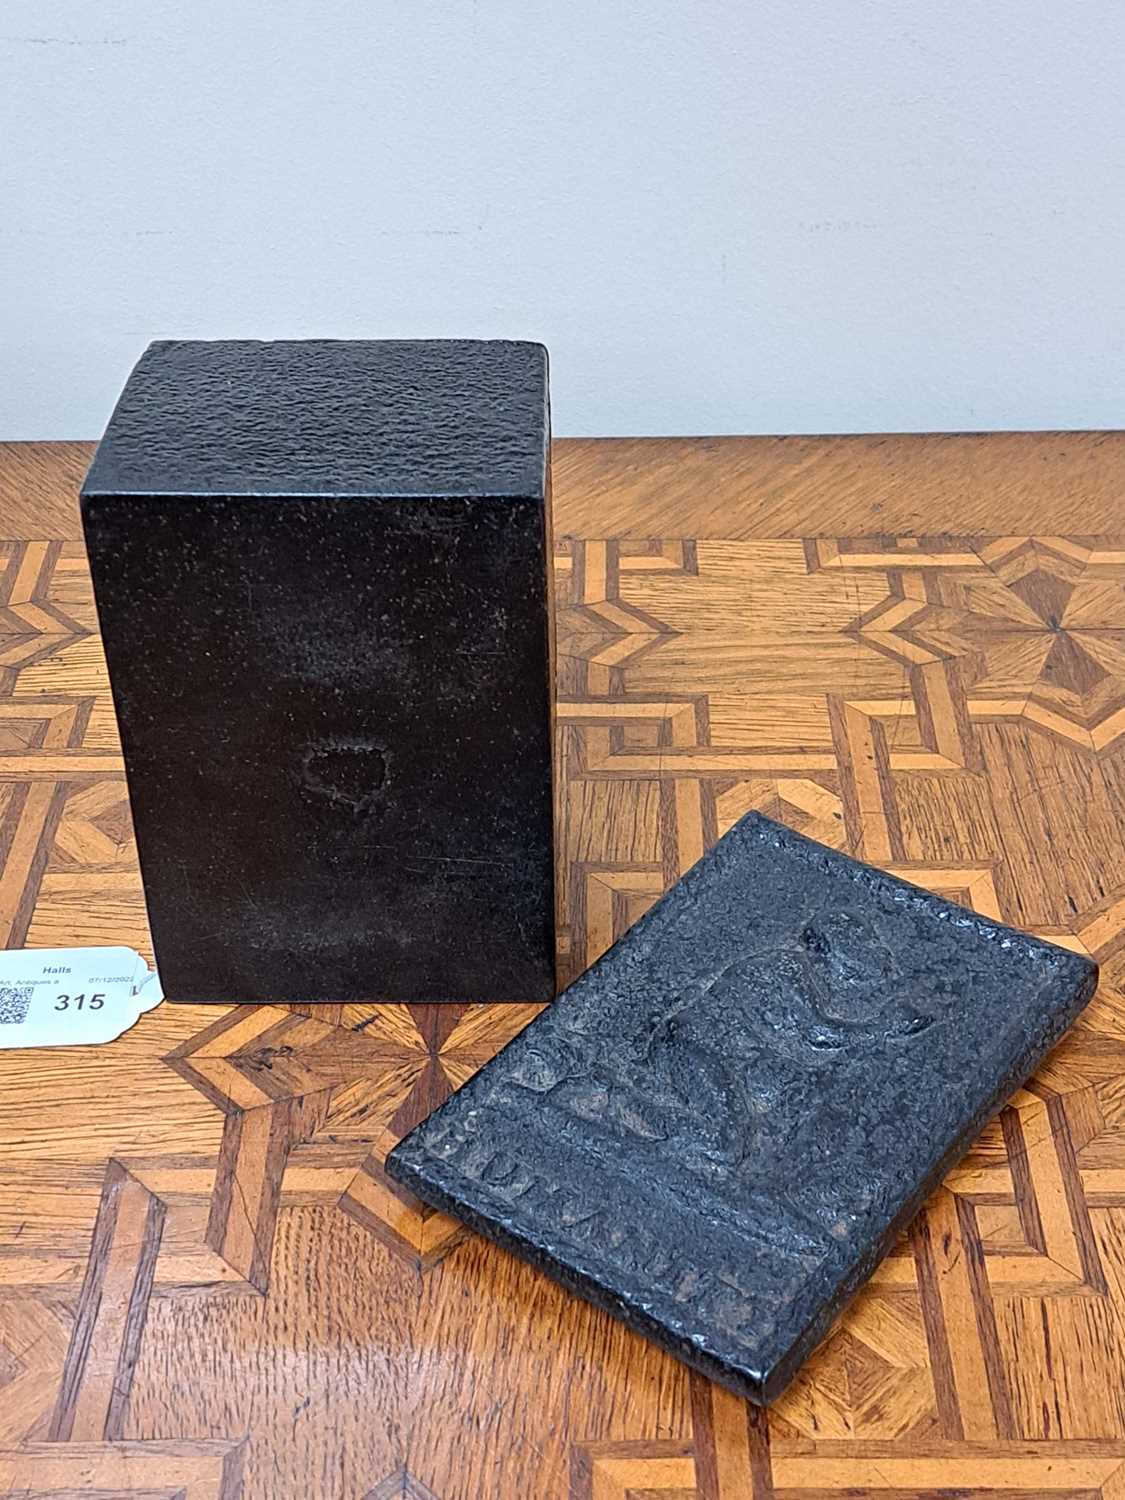 An early 19th century Darby of Coalbrookdale cast iron Anti-Slavery box and cover - Image 4 of 9